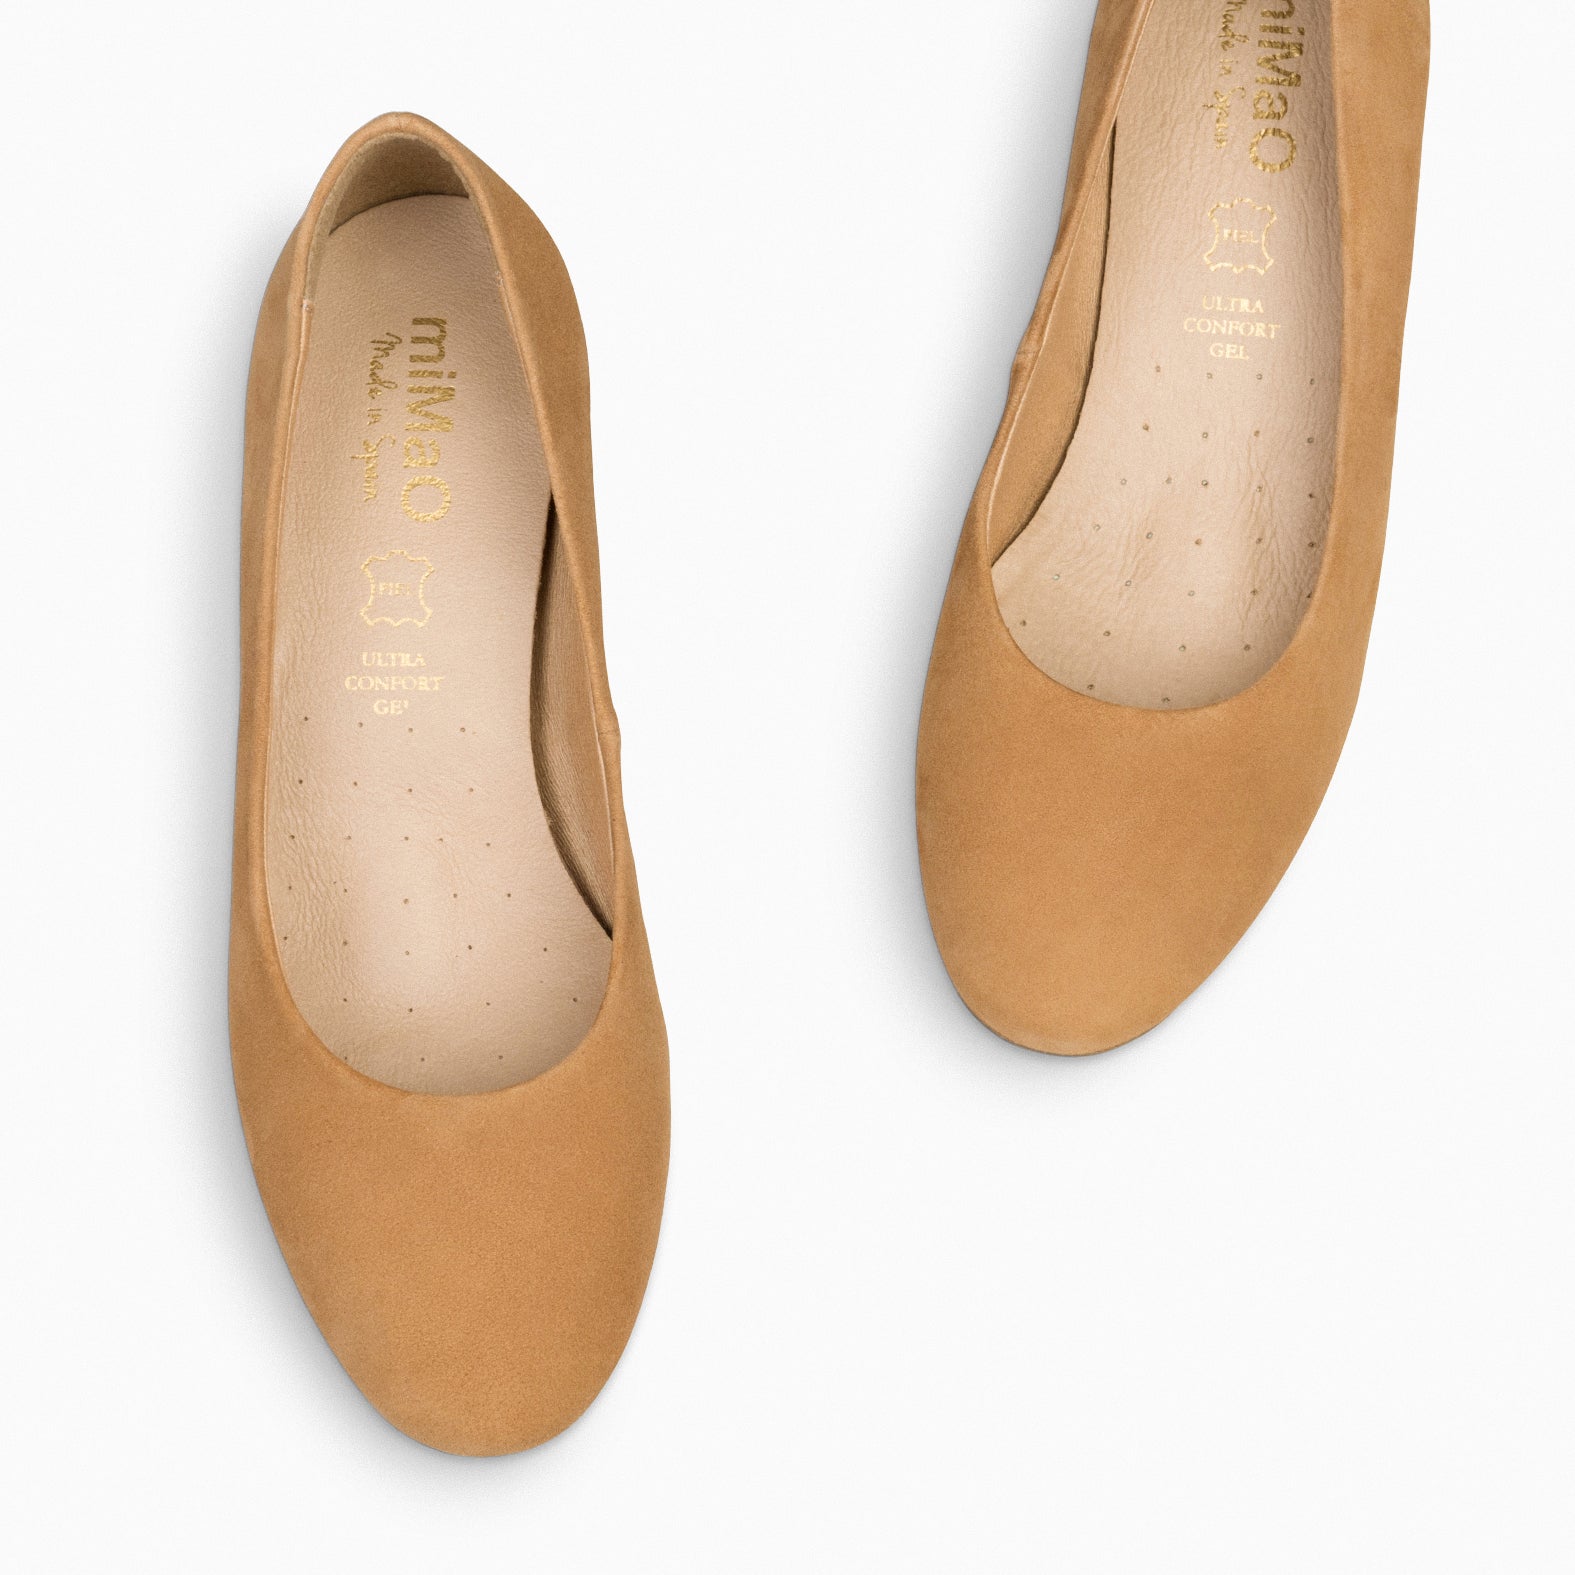 URBAN ROUND – CAMEL suede leather low heels